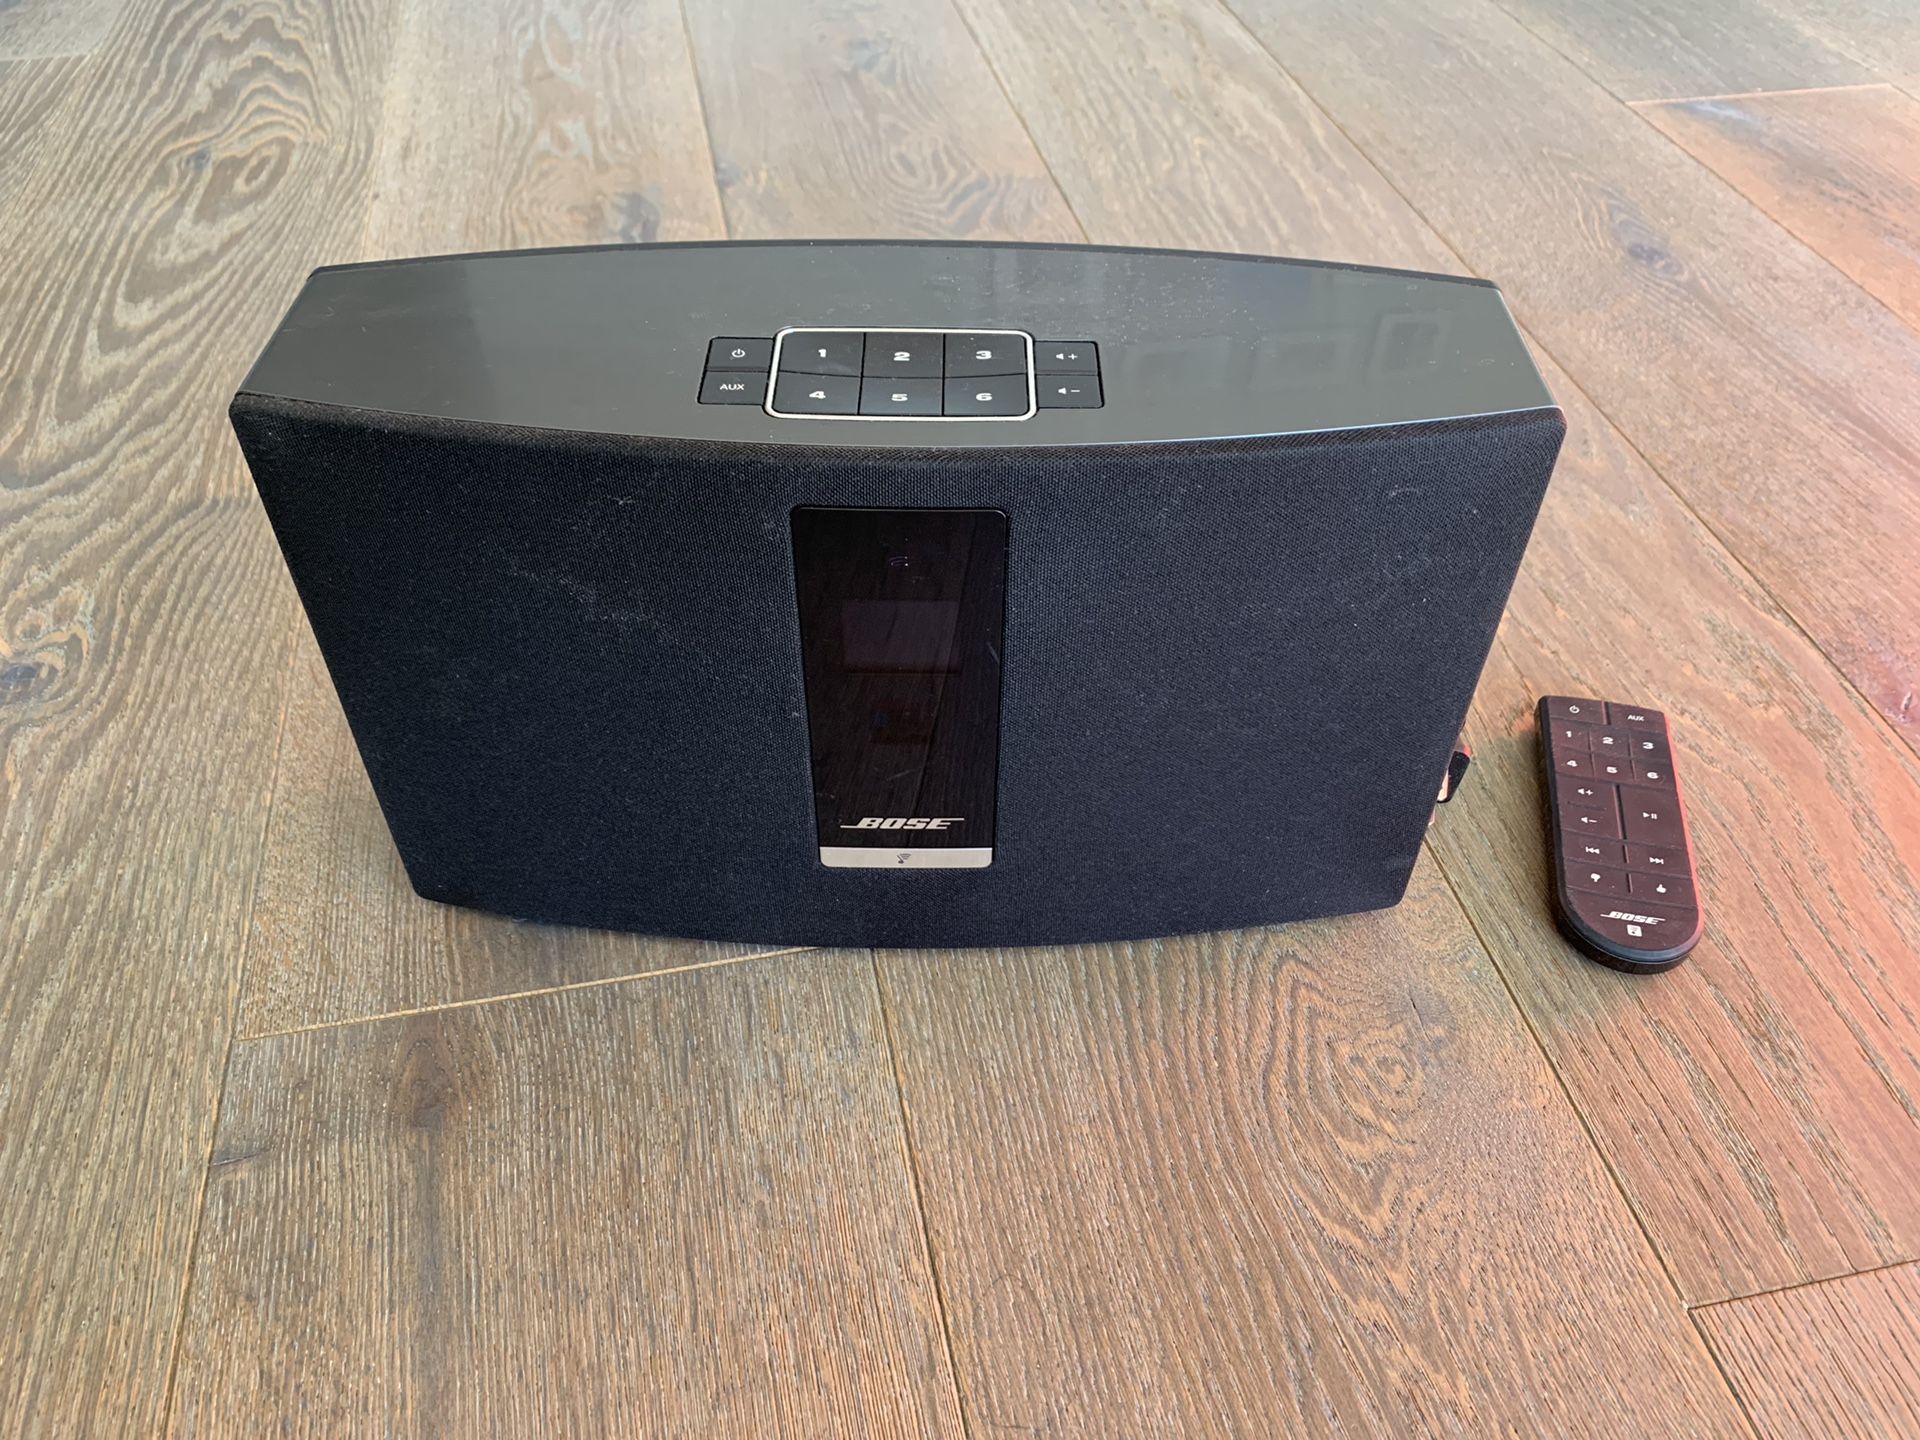 Bose SoundTouch 20 WiFi Music System